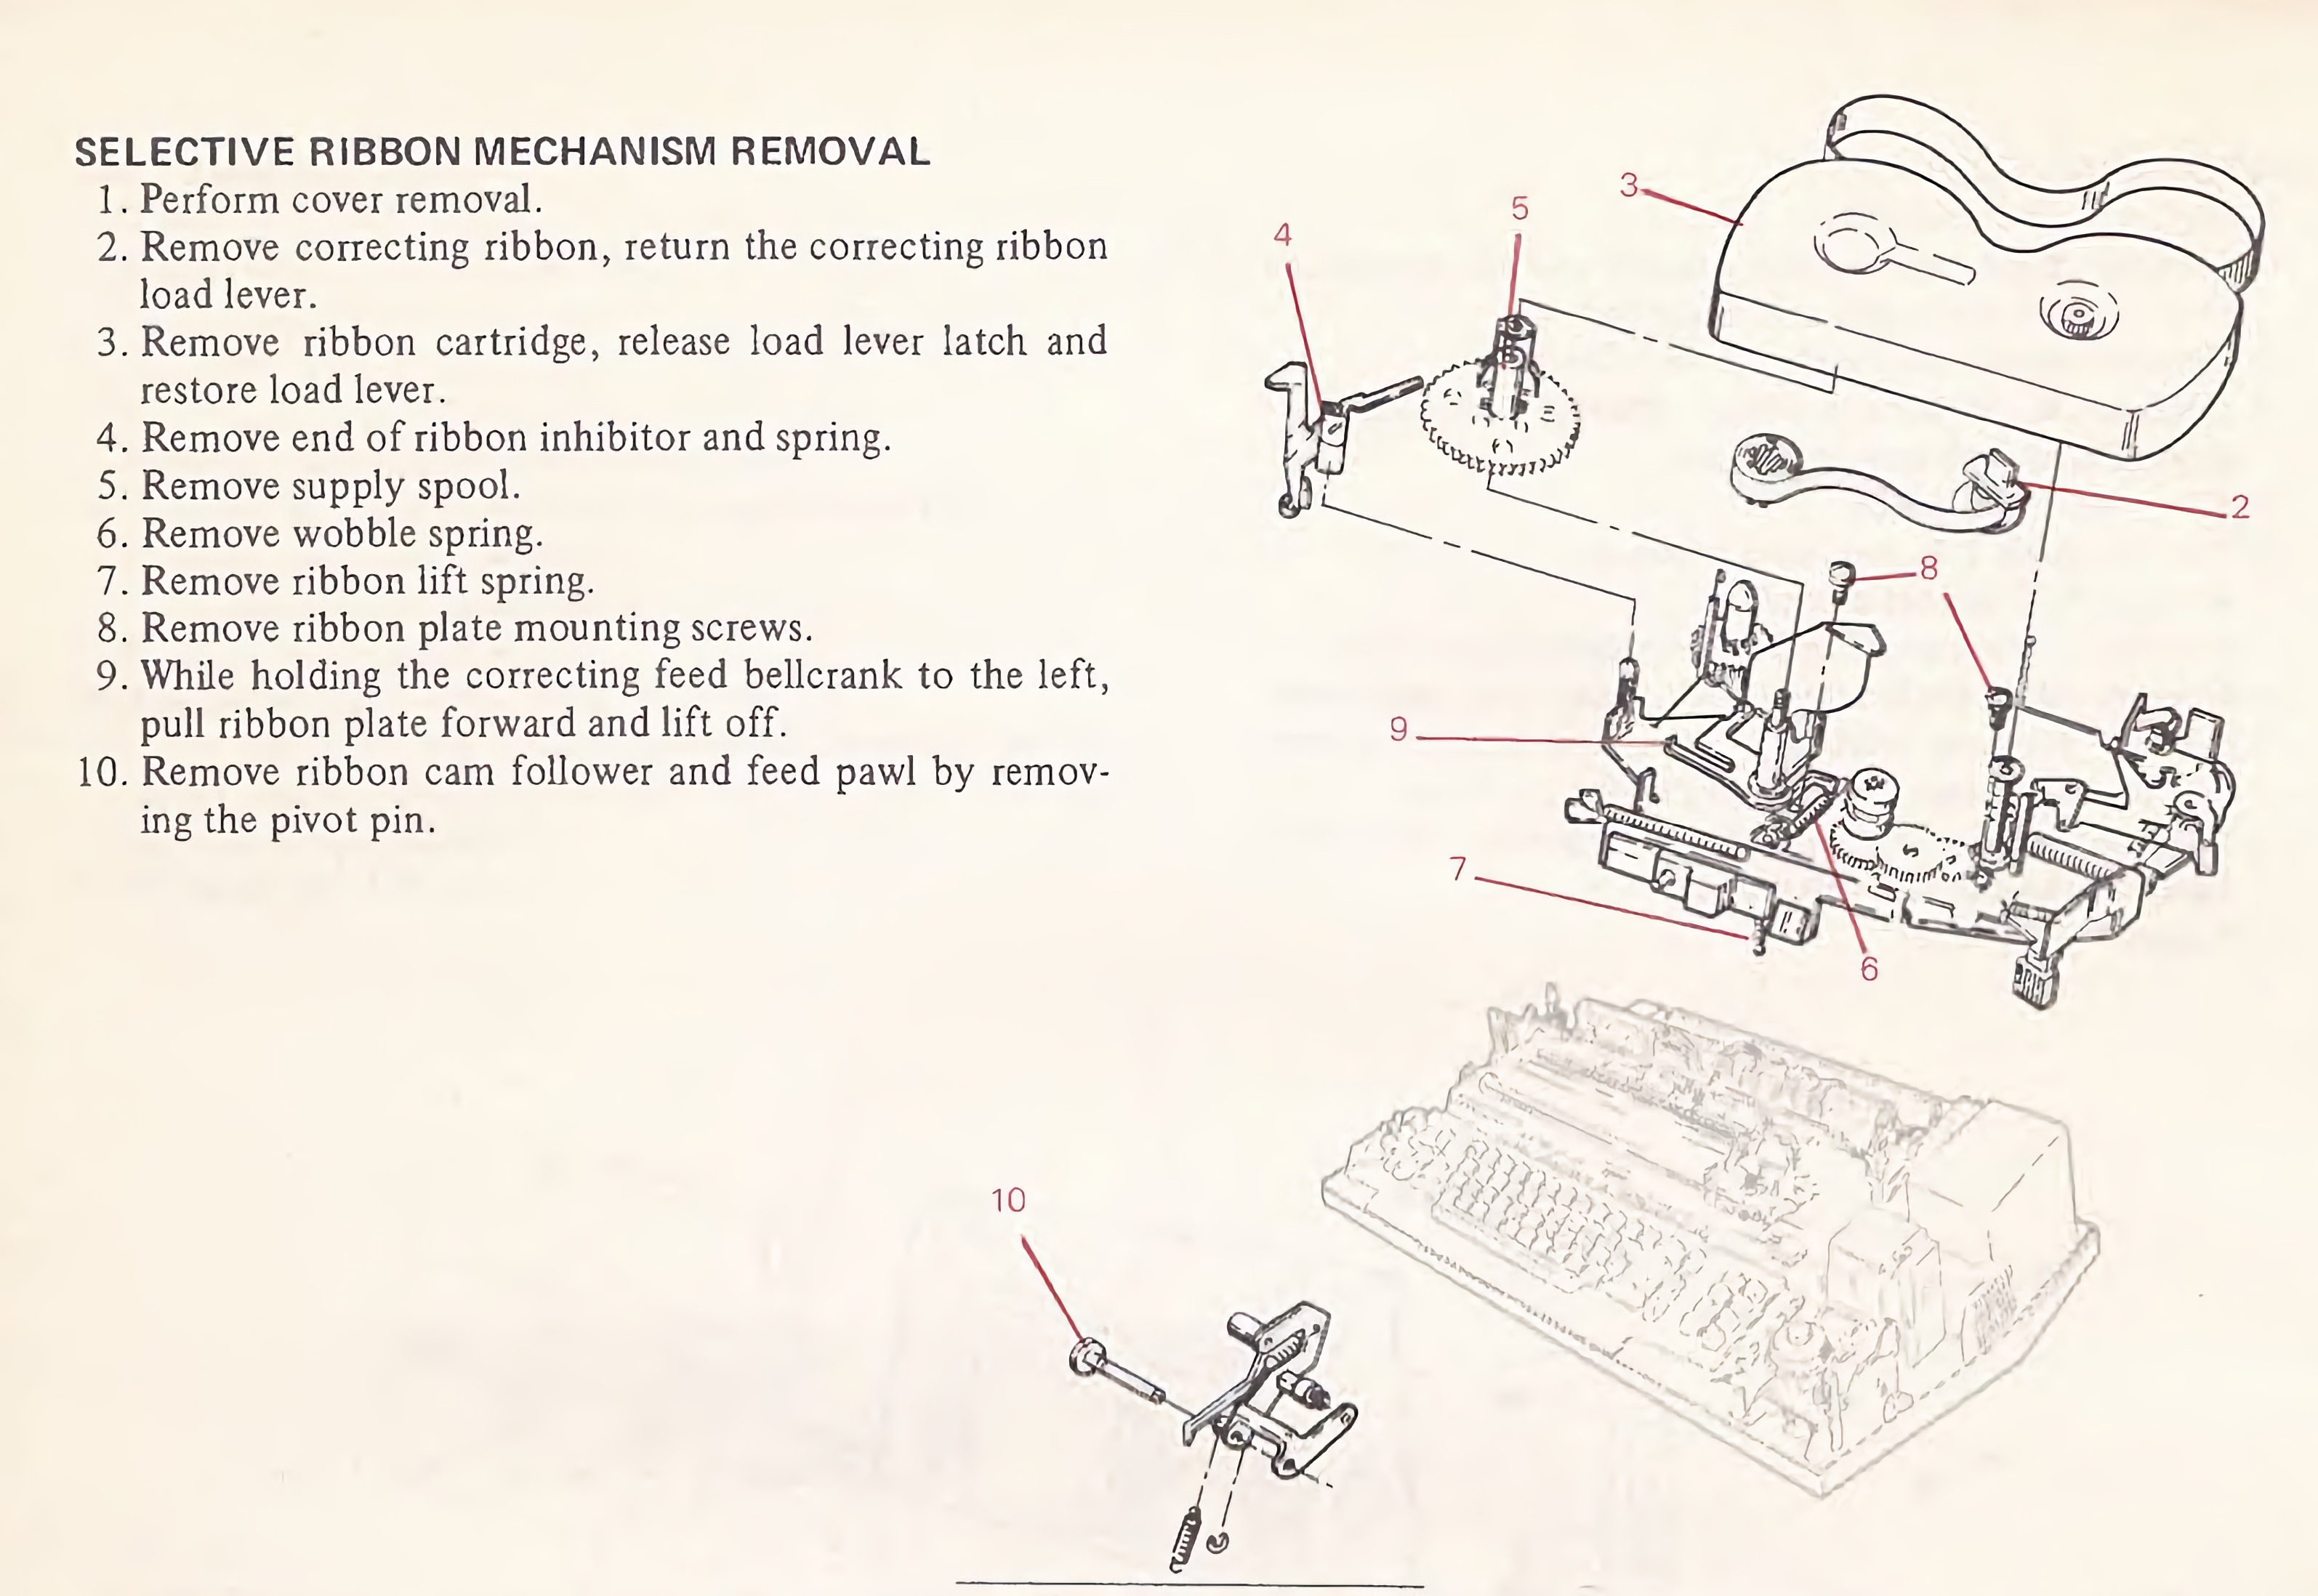 Ribbon mechanism removal instructions